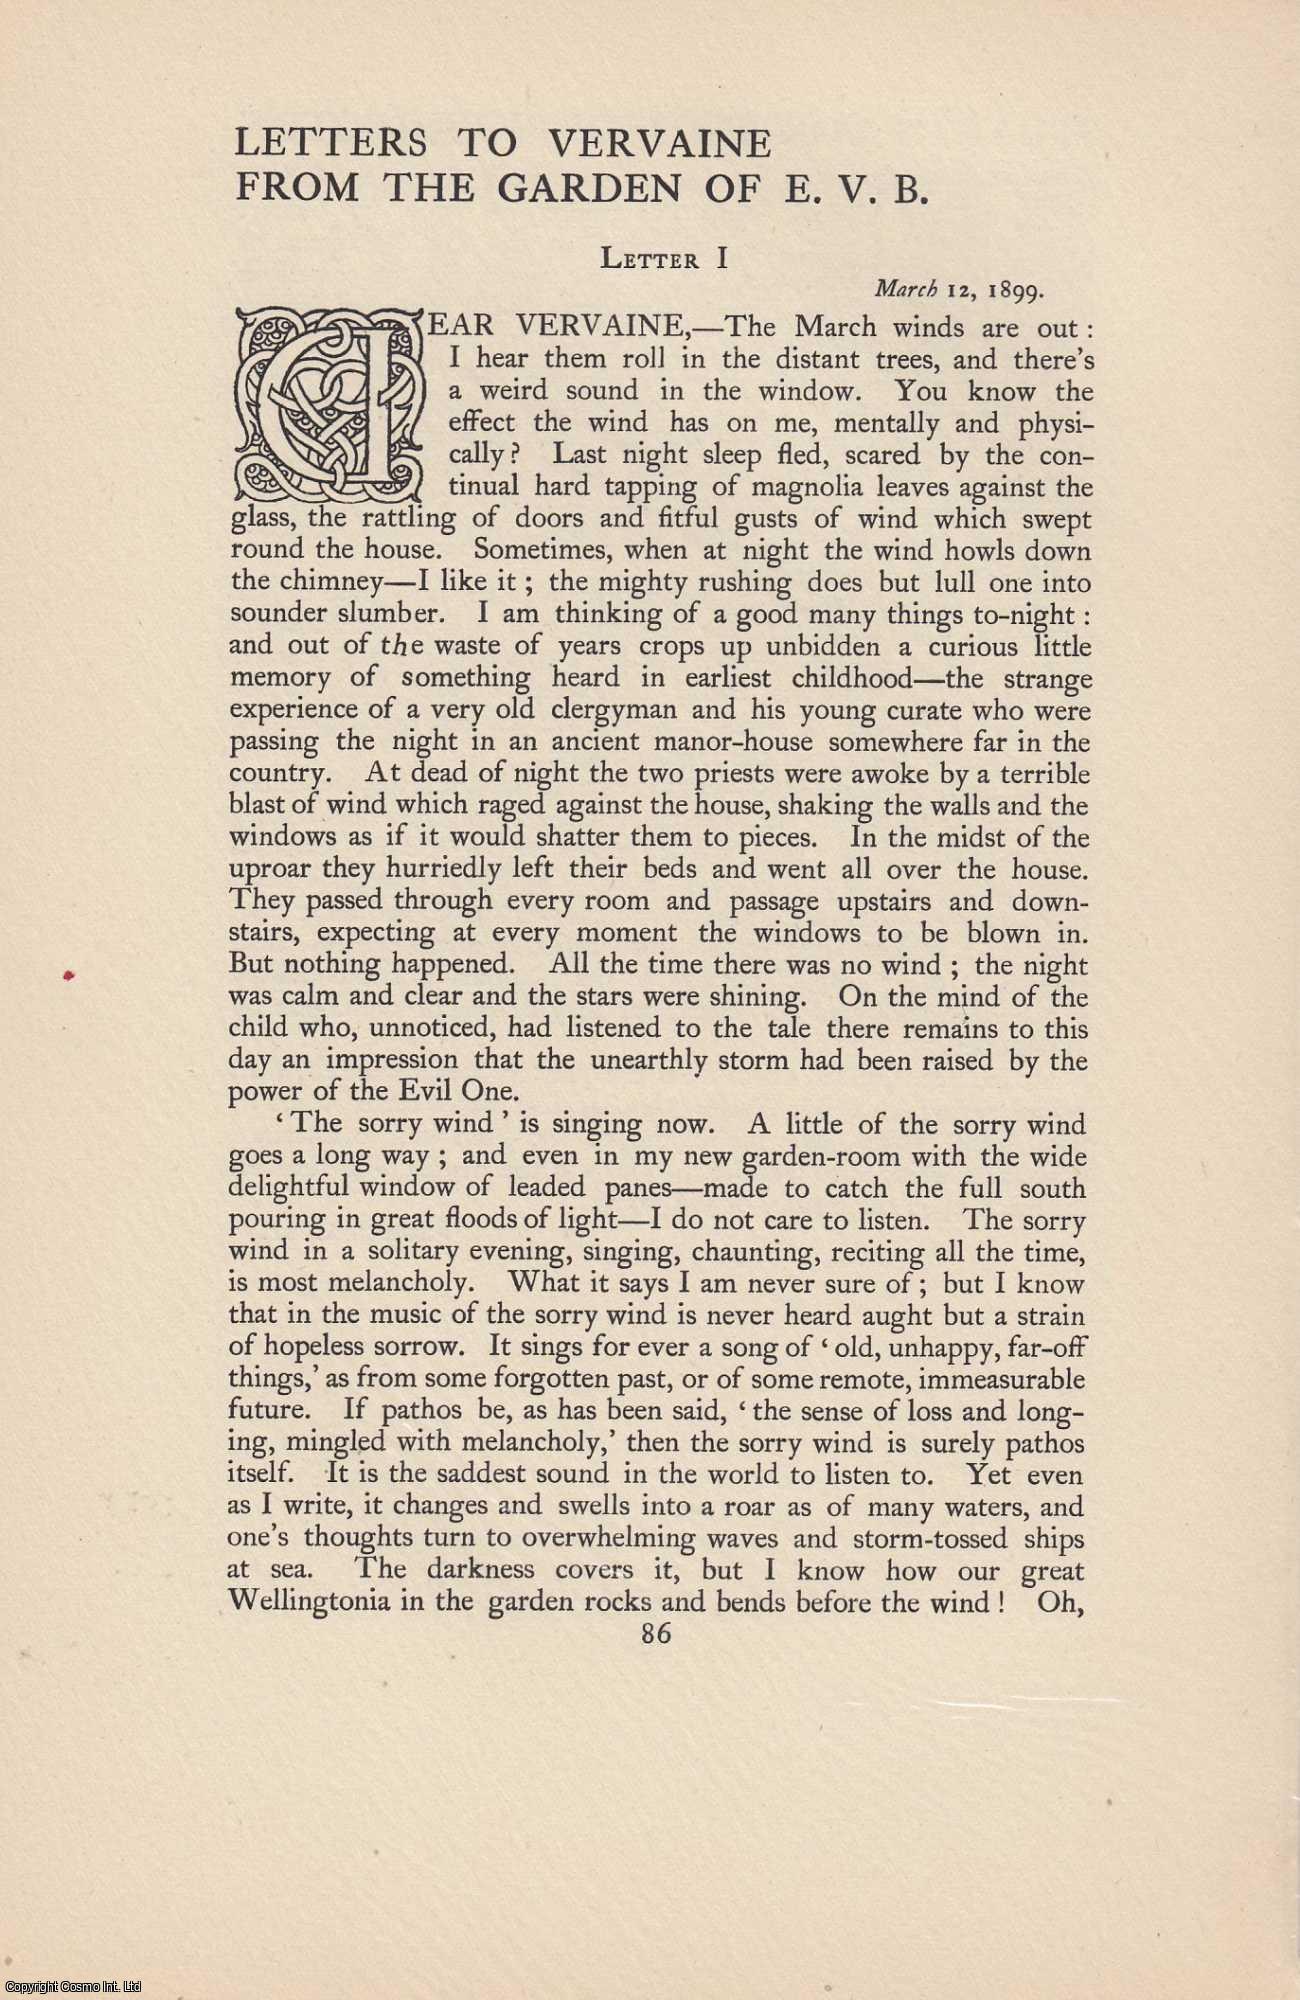 No Author Stated - Letters to Vervaine. From the Garden of E.V.B. A rare original article from the Anglo Saxon Review, 1899.